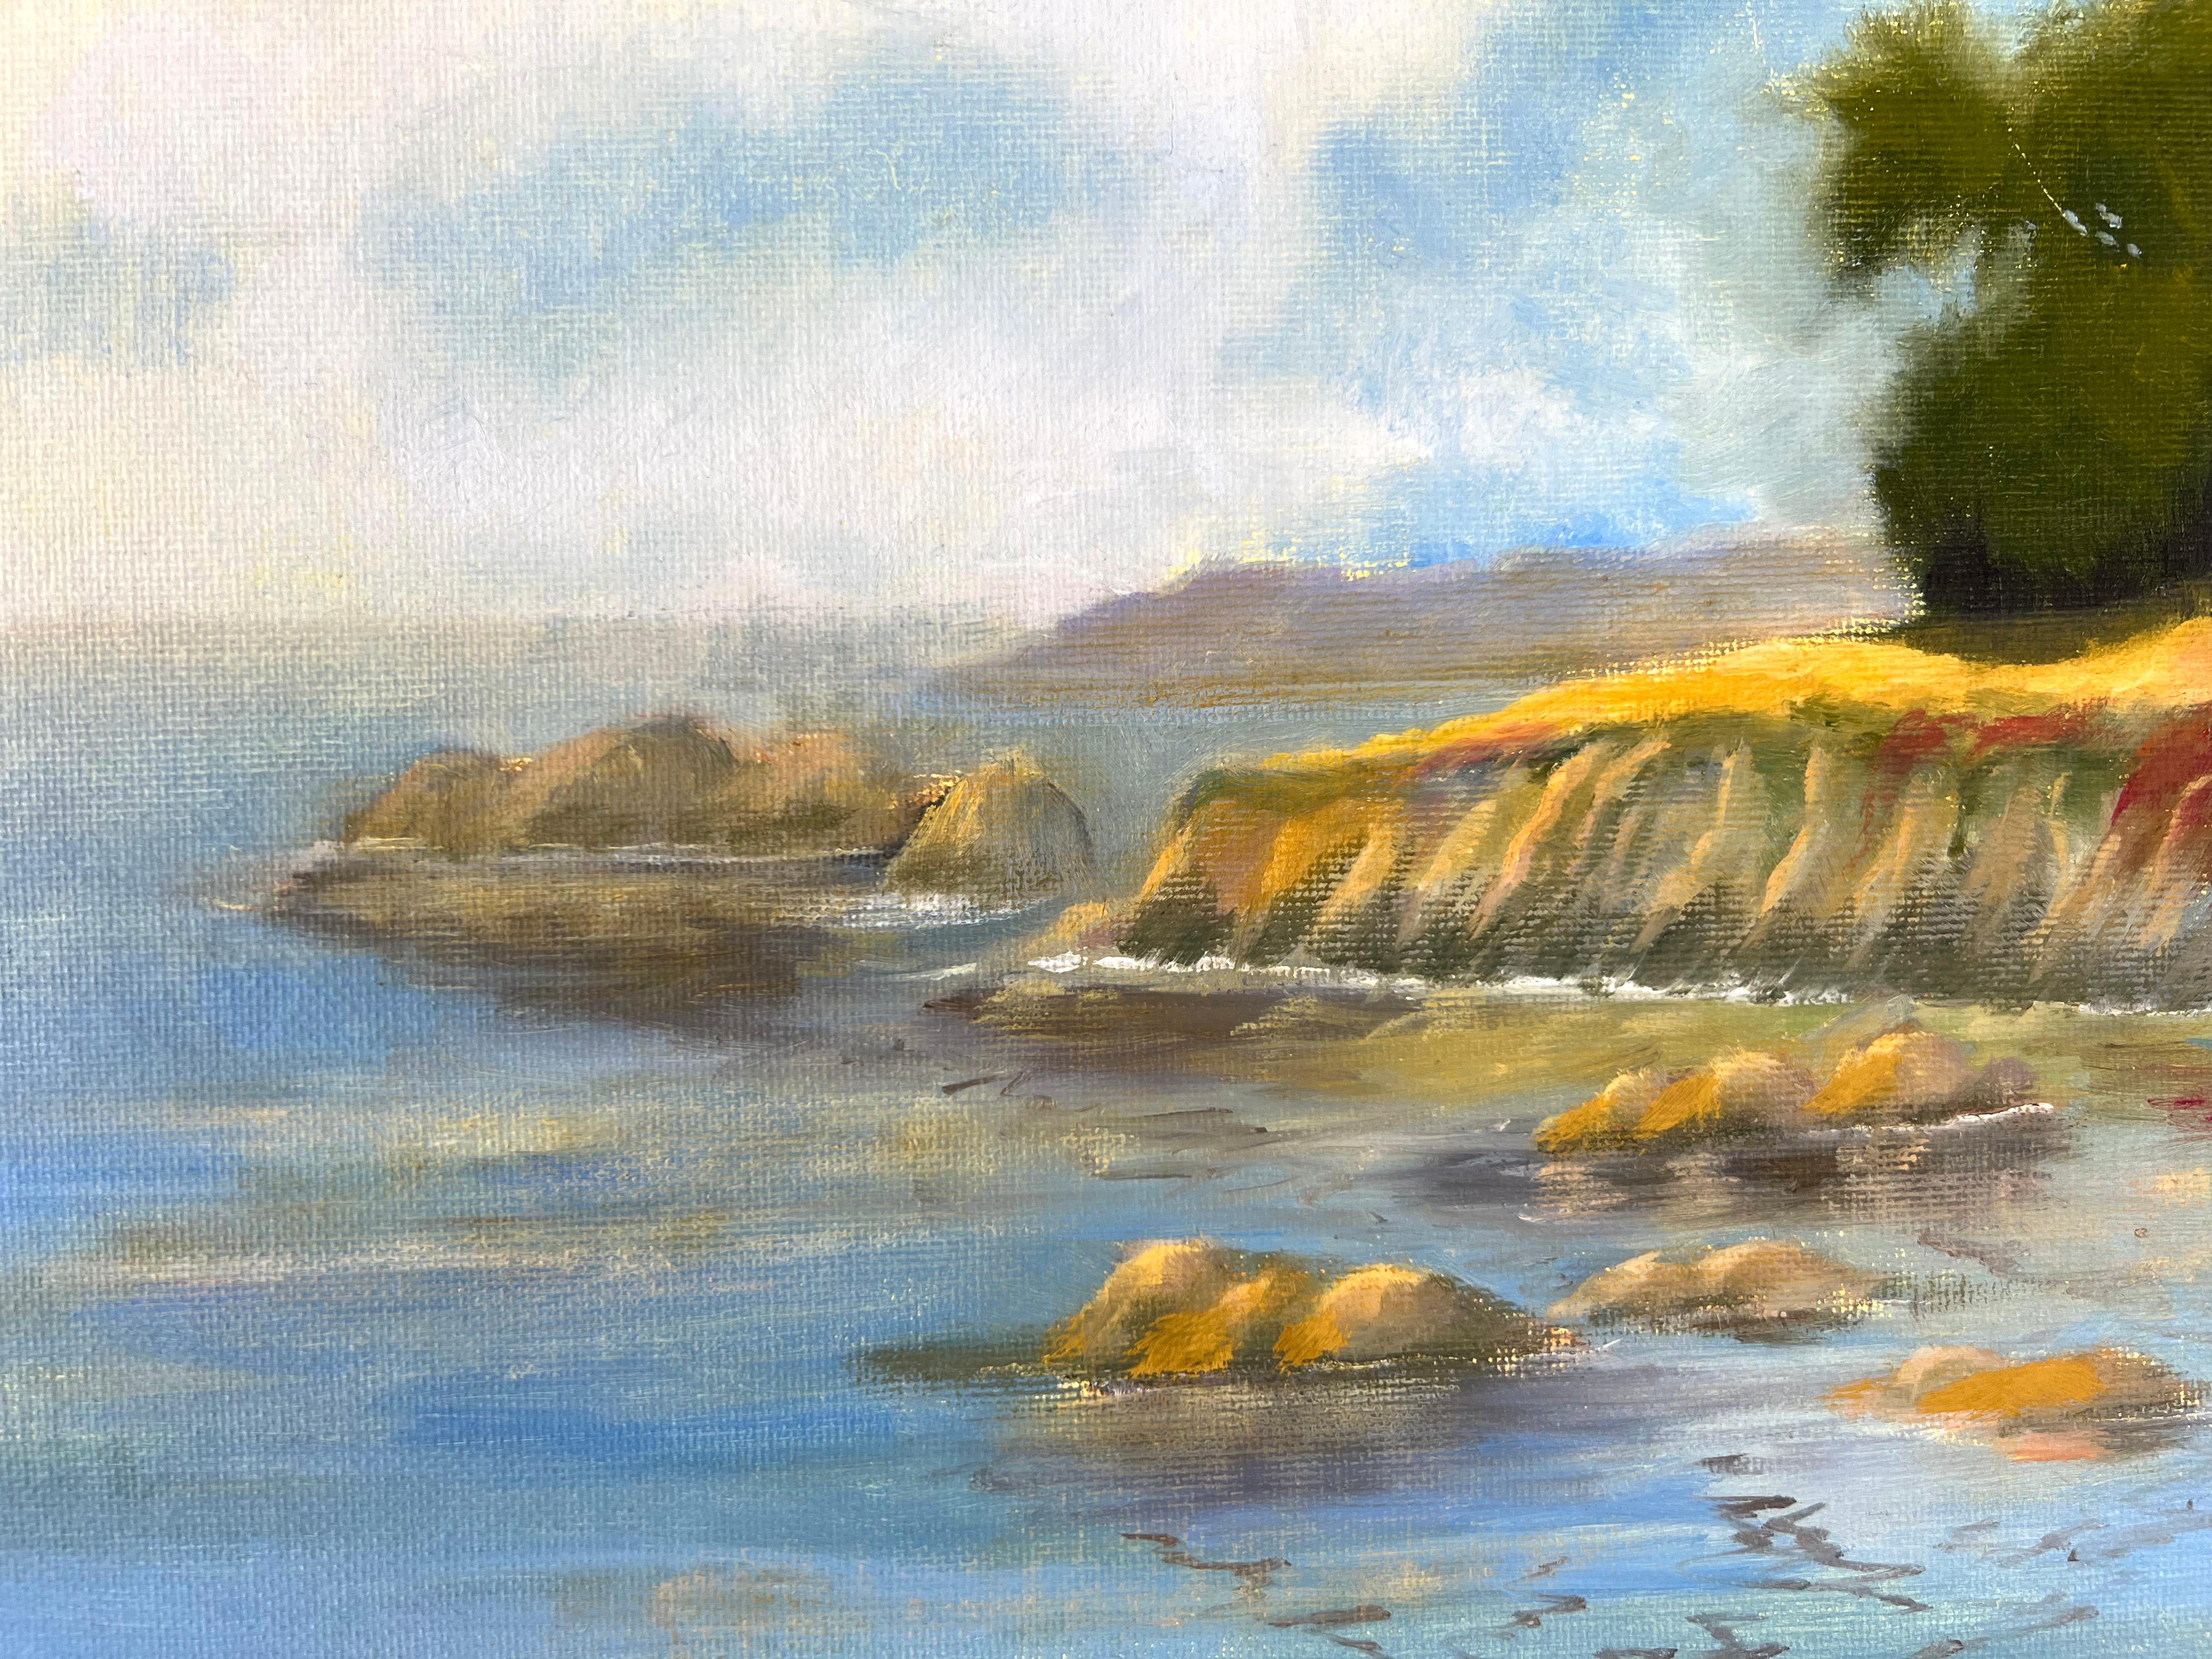 California Coastline by Gail Wilhelm

Serene seascape painting of the California coastline by Novato artist Gail Wilhelm (American, 1938-2018). Hues of blues and browns make up the water with the cliffs casting a shadow below. A vibrant green tree